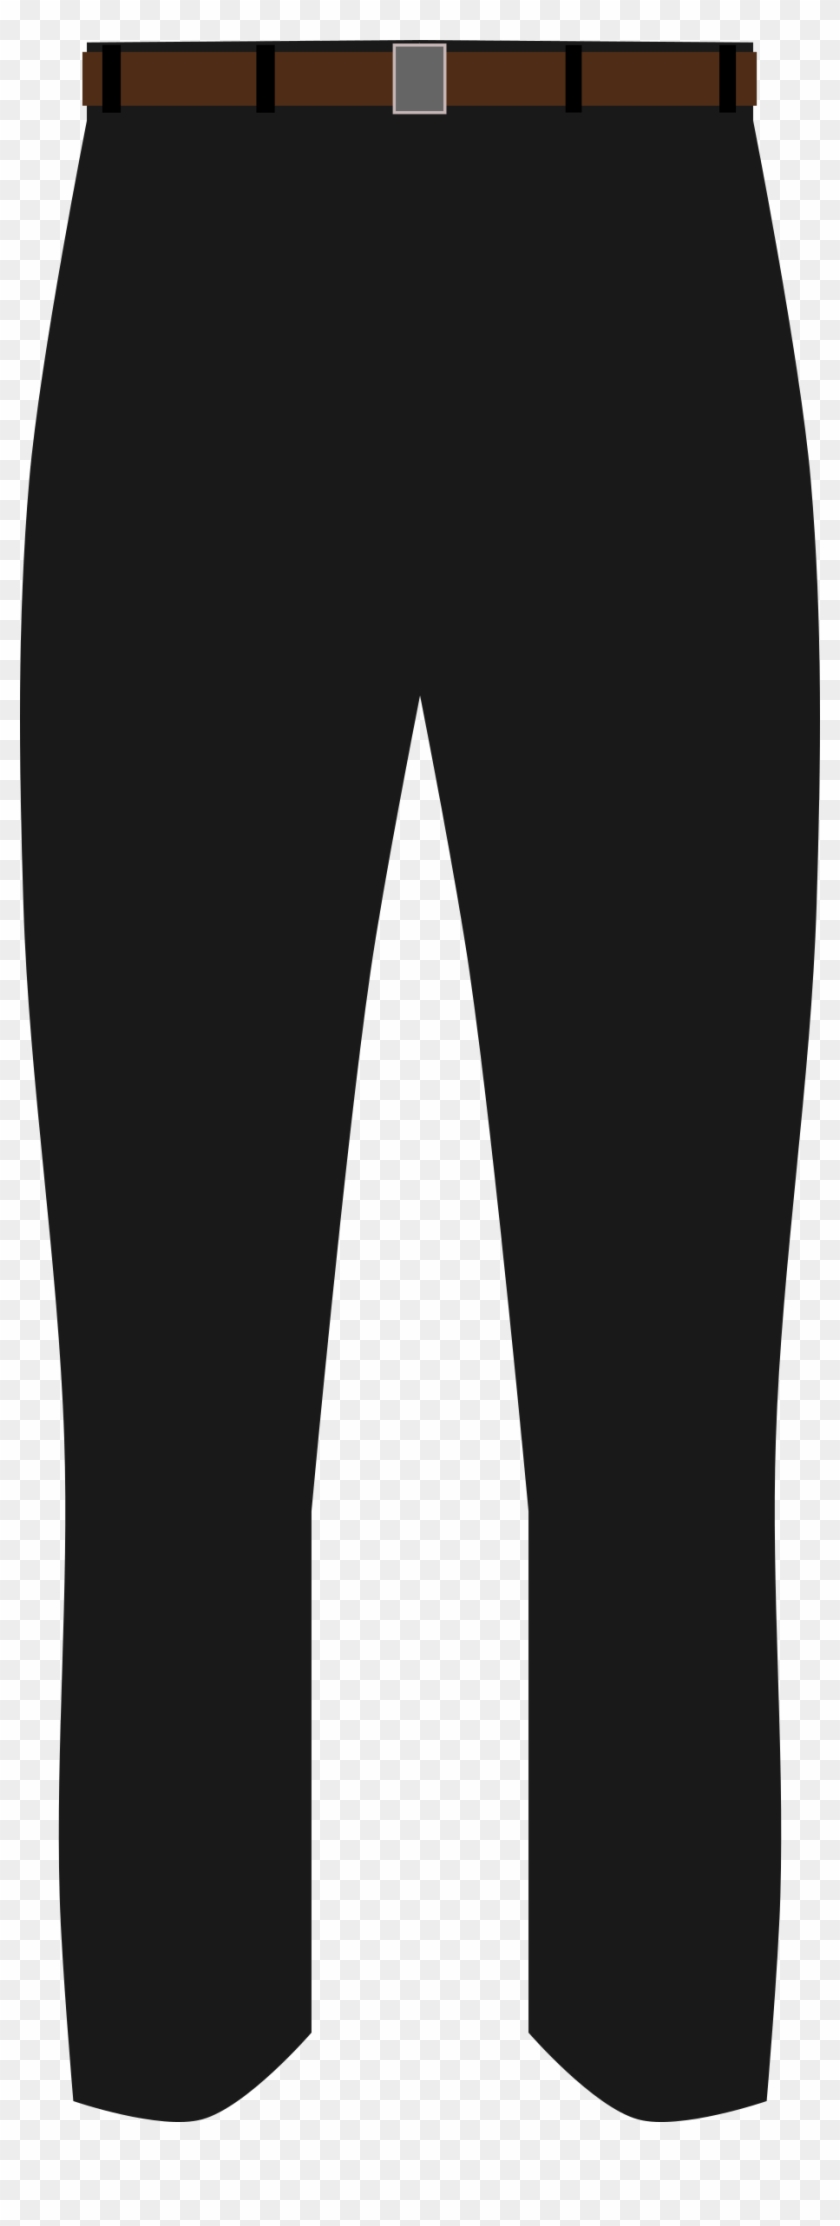 Premium Vector | Vector illustration of pants front and side views shorts  vector sketch illustration